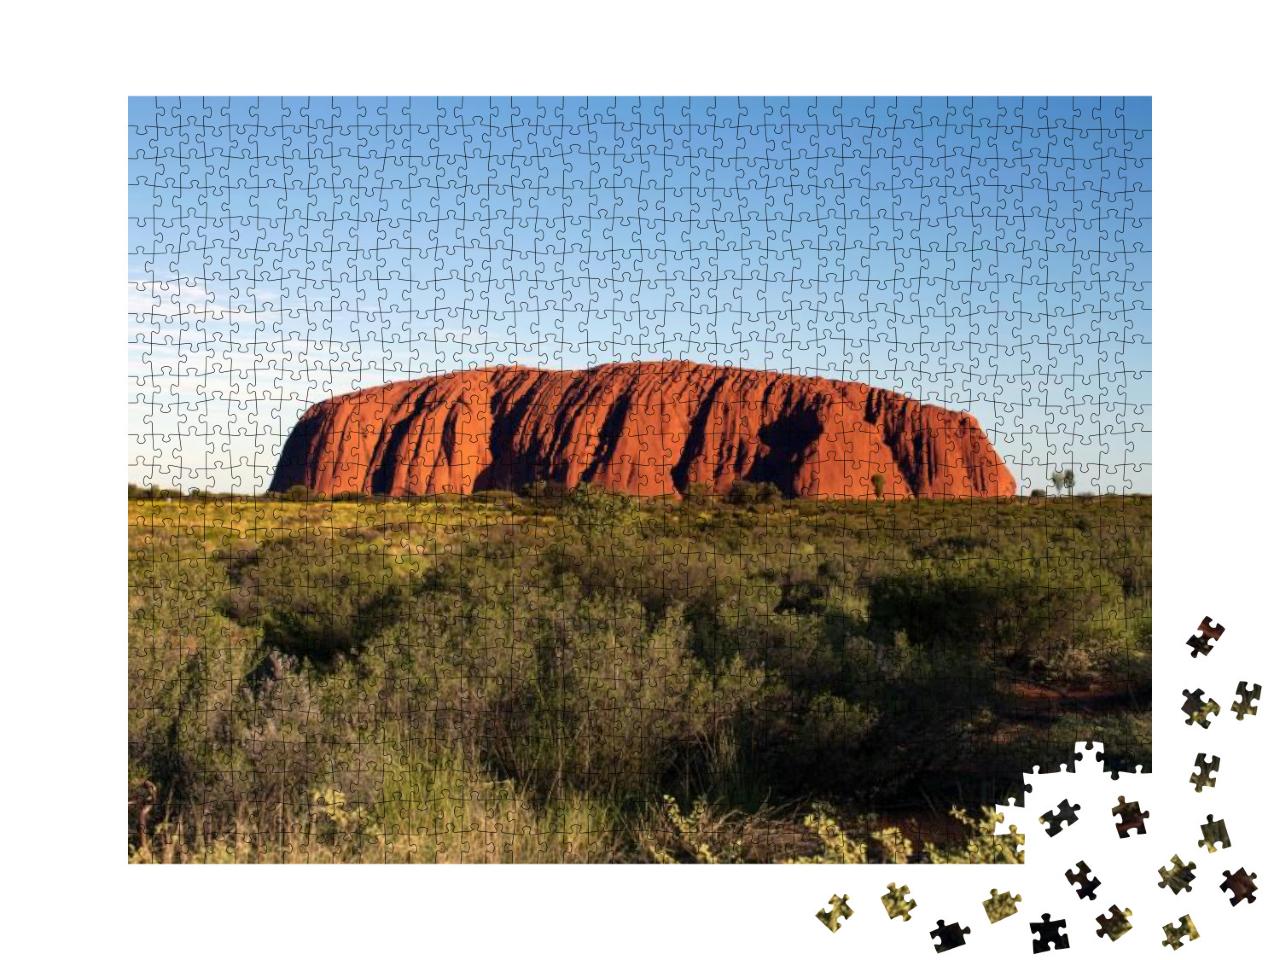 Ayers Rock Australia... Jigsaw Puzzle with 1000 pieces